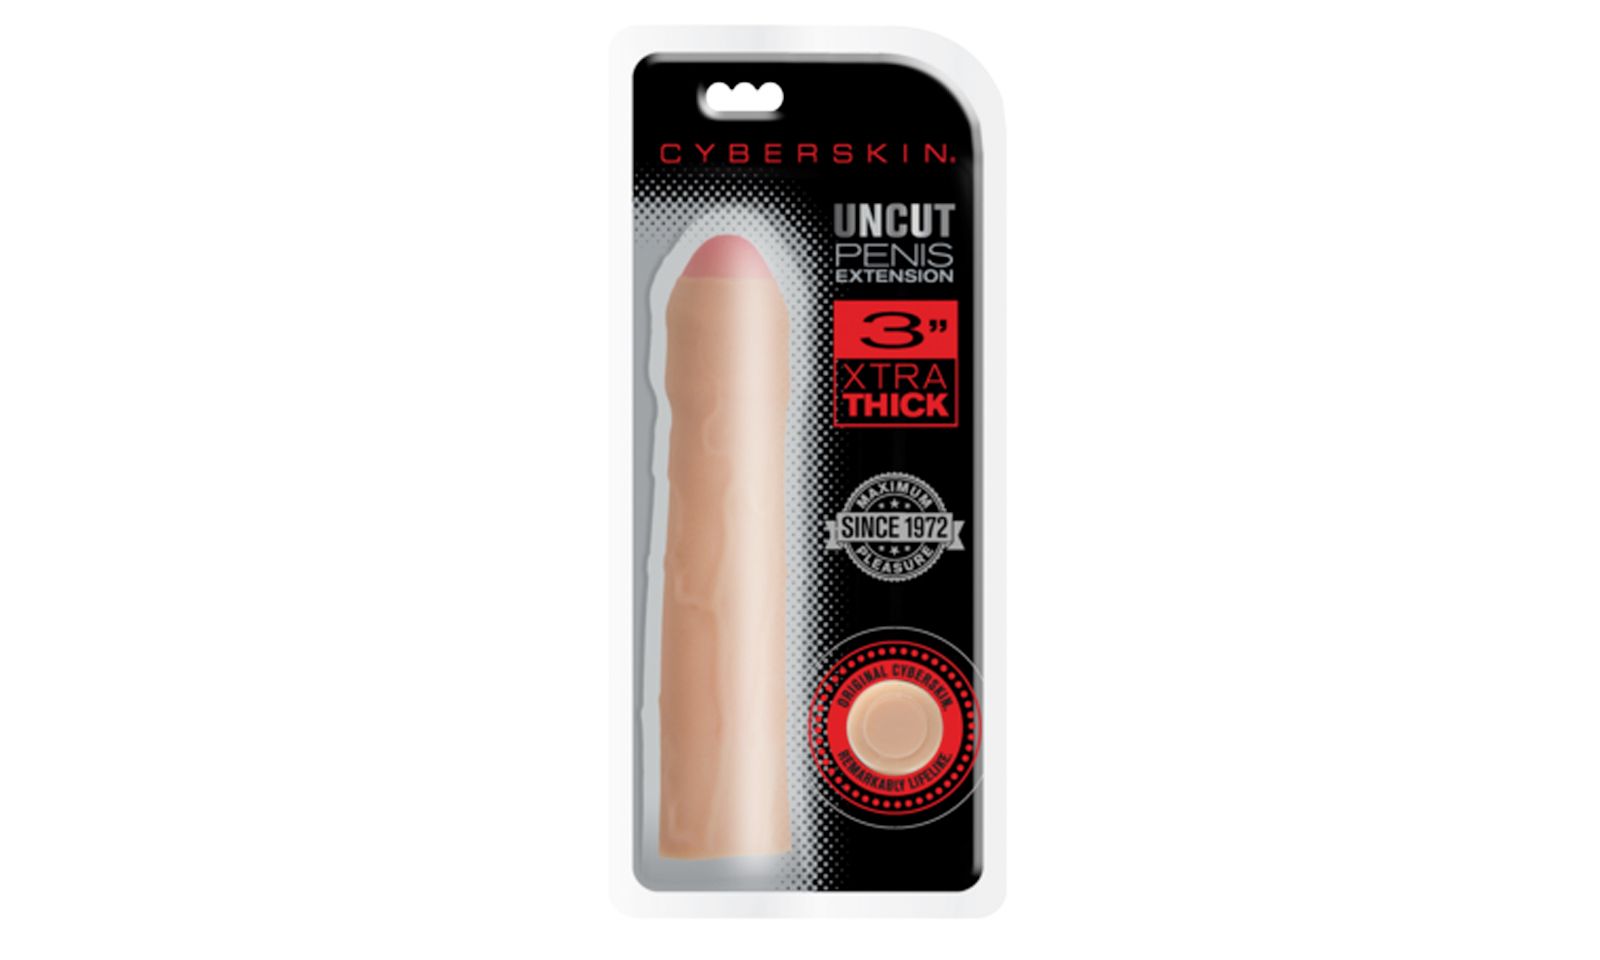 Topco Sales Shipping CyberSkin Xtra Thick Uncut Penis Extensions